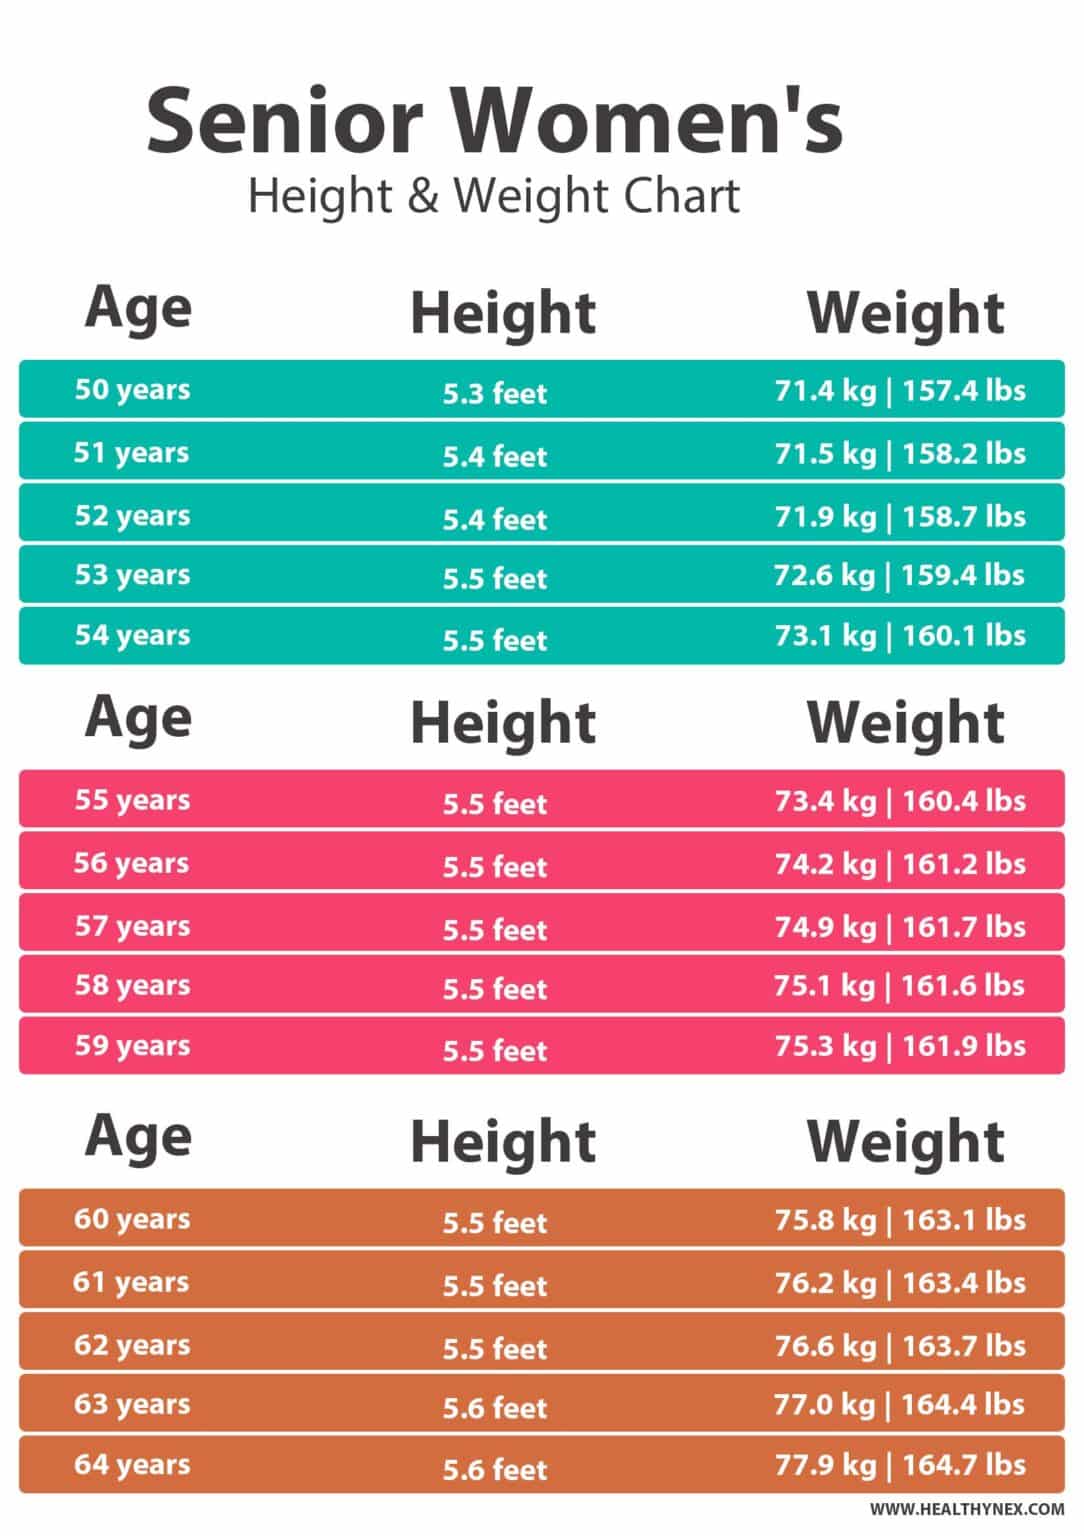 Bmi Weight Chart For Seniors Female 50 Years Old | Hot Sex Picture